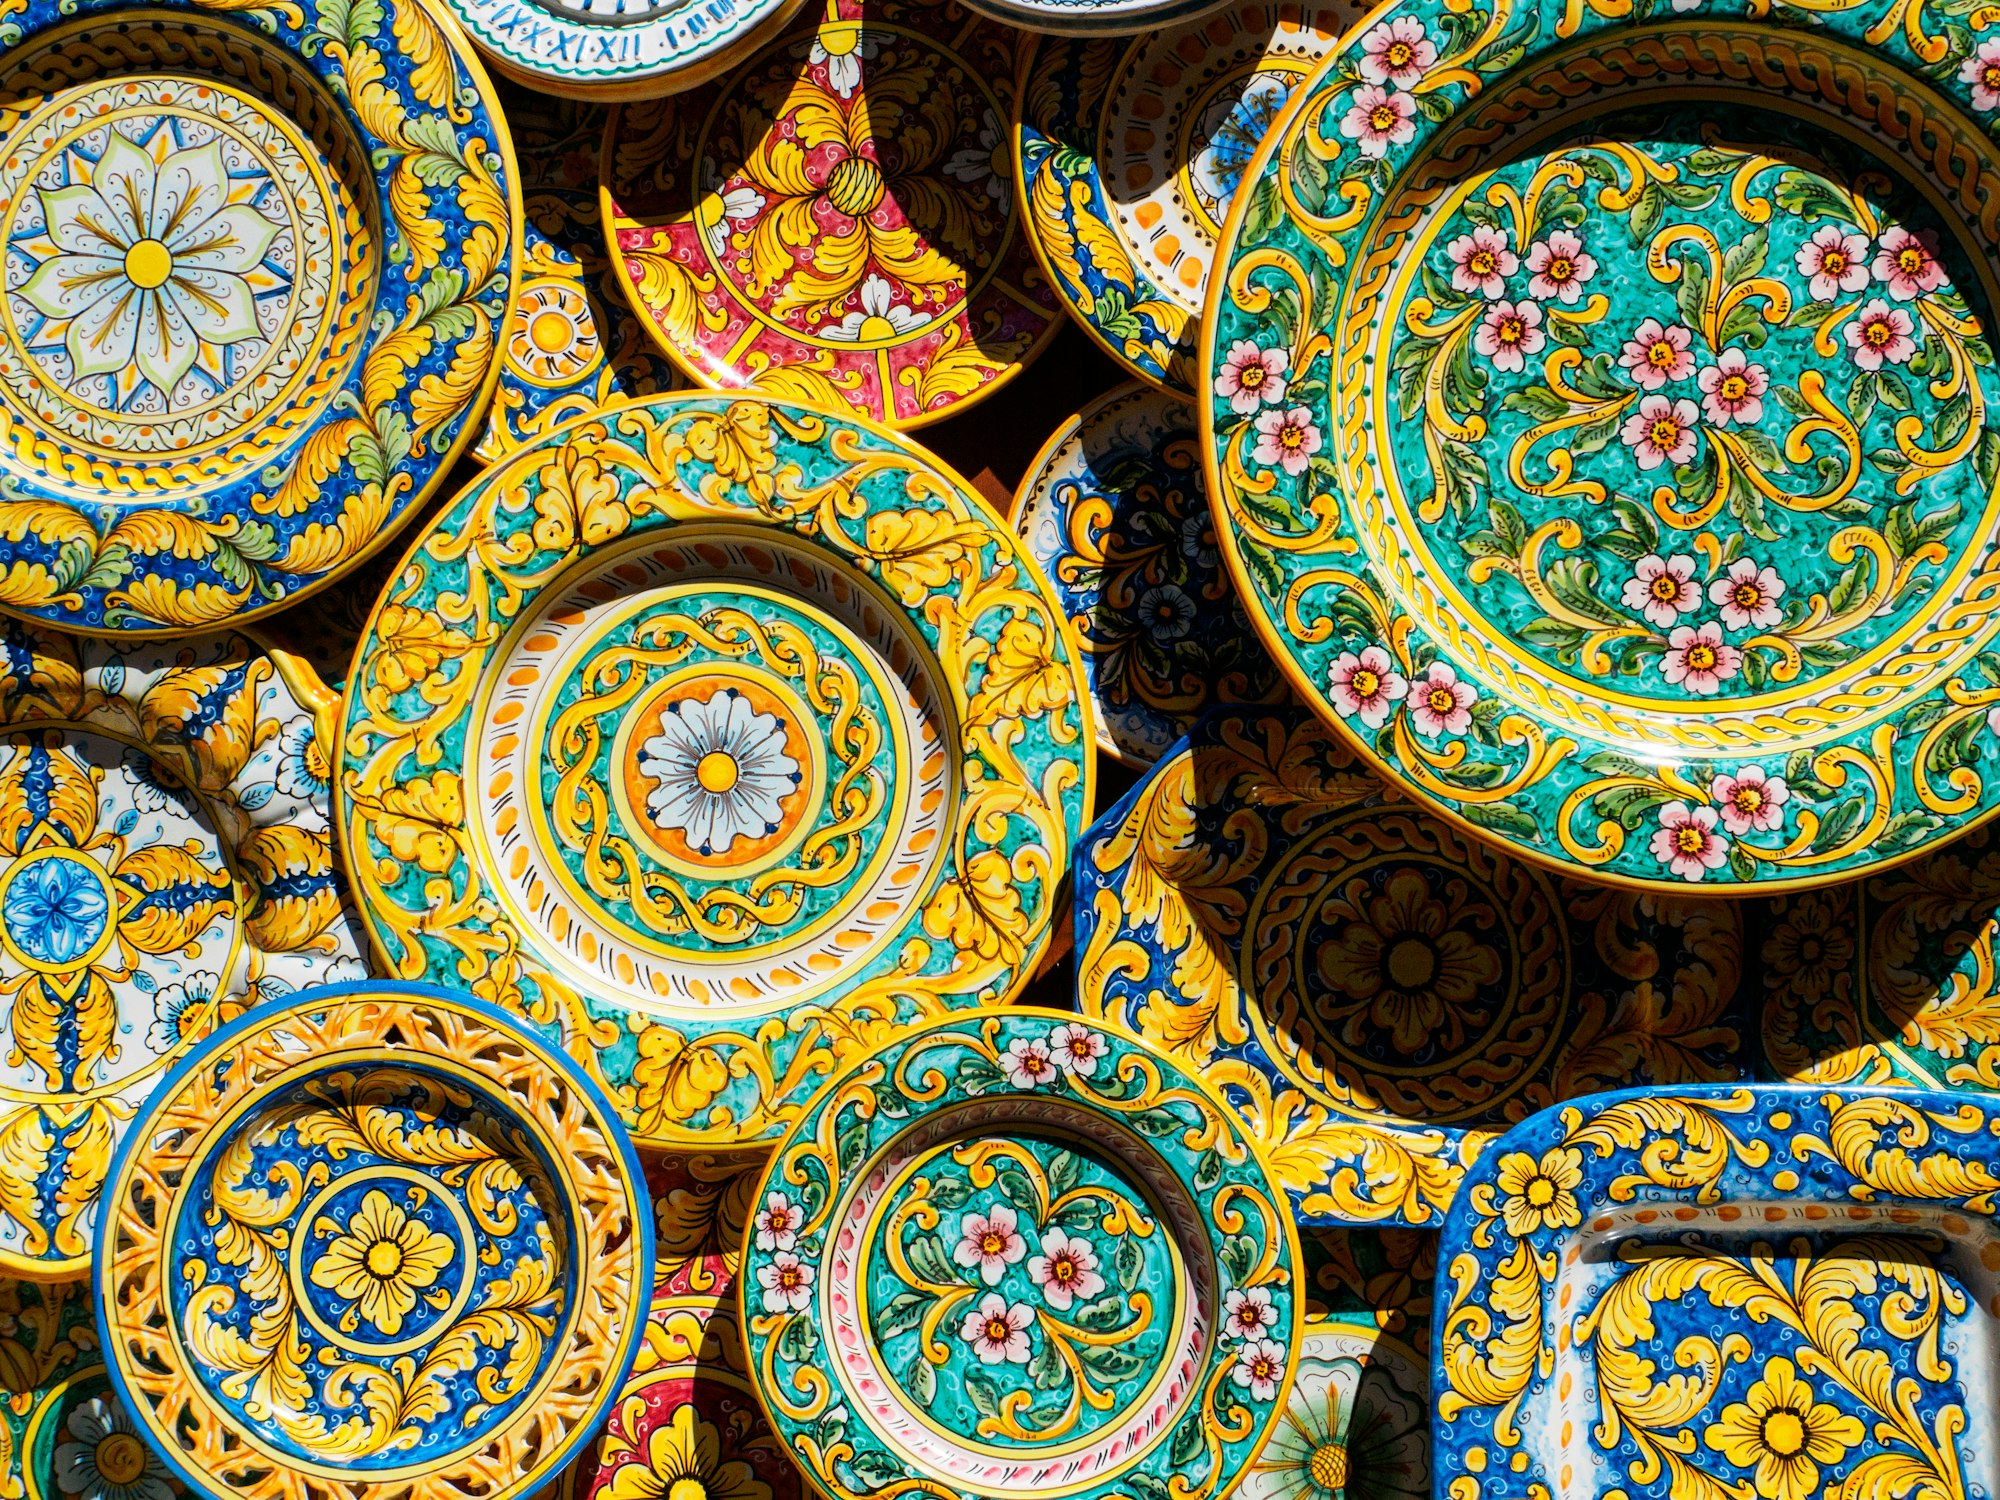 One of the typical artworks of a small town in Sicily, Erice, is the handmade colourful pottery.